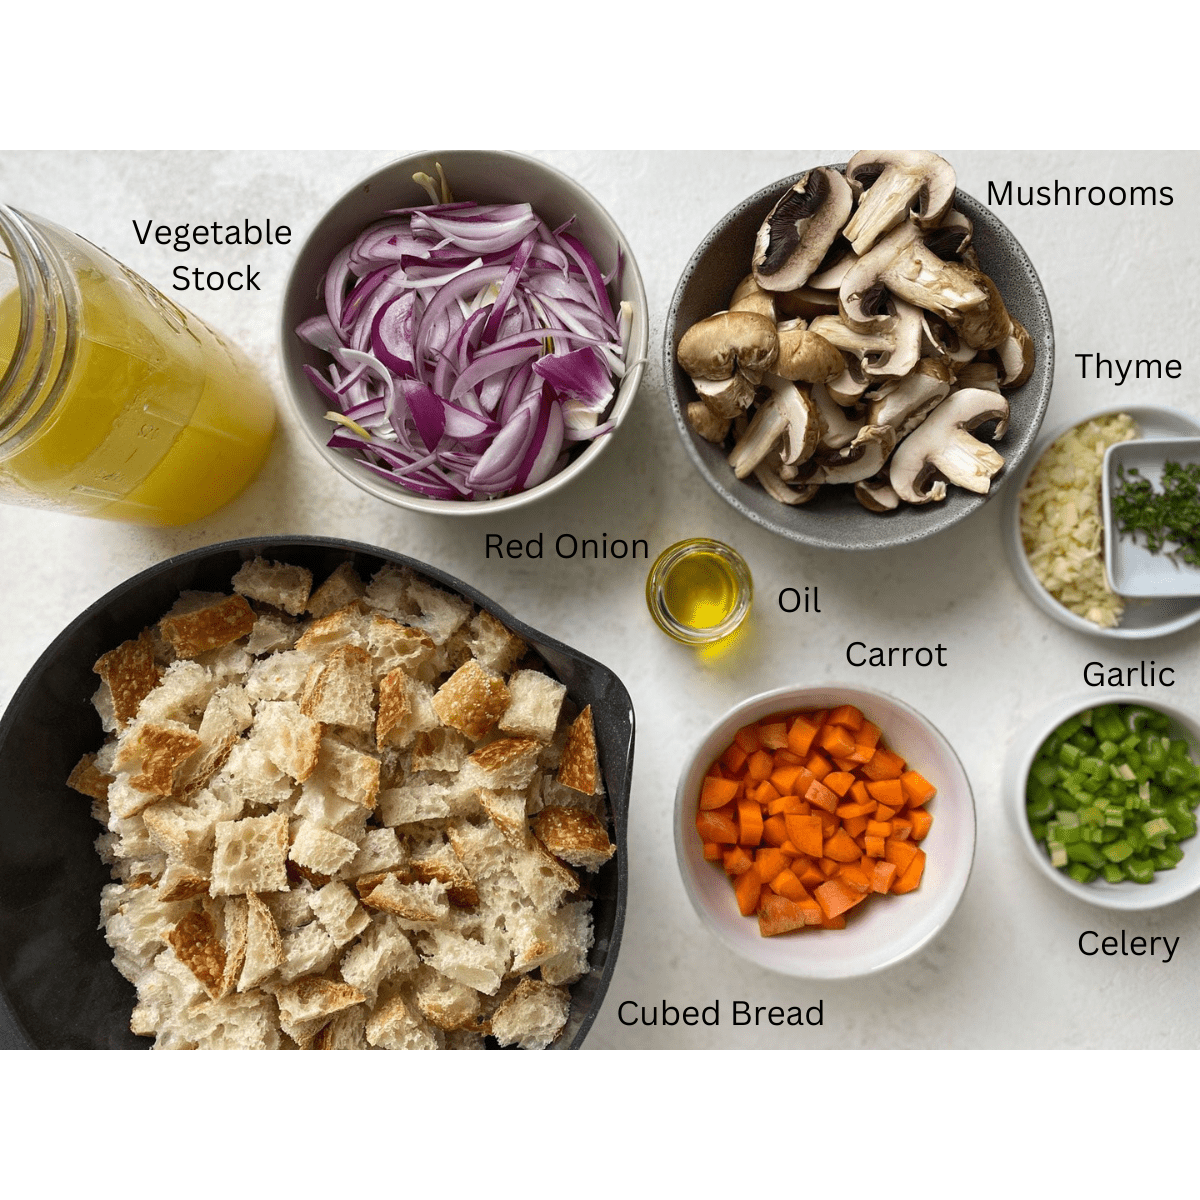 mushroom stuffing ingredients measured out against a white surface